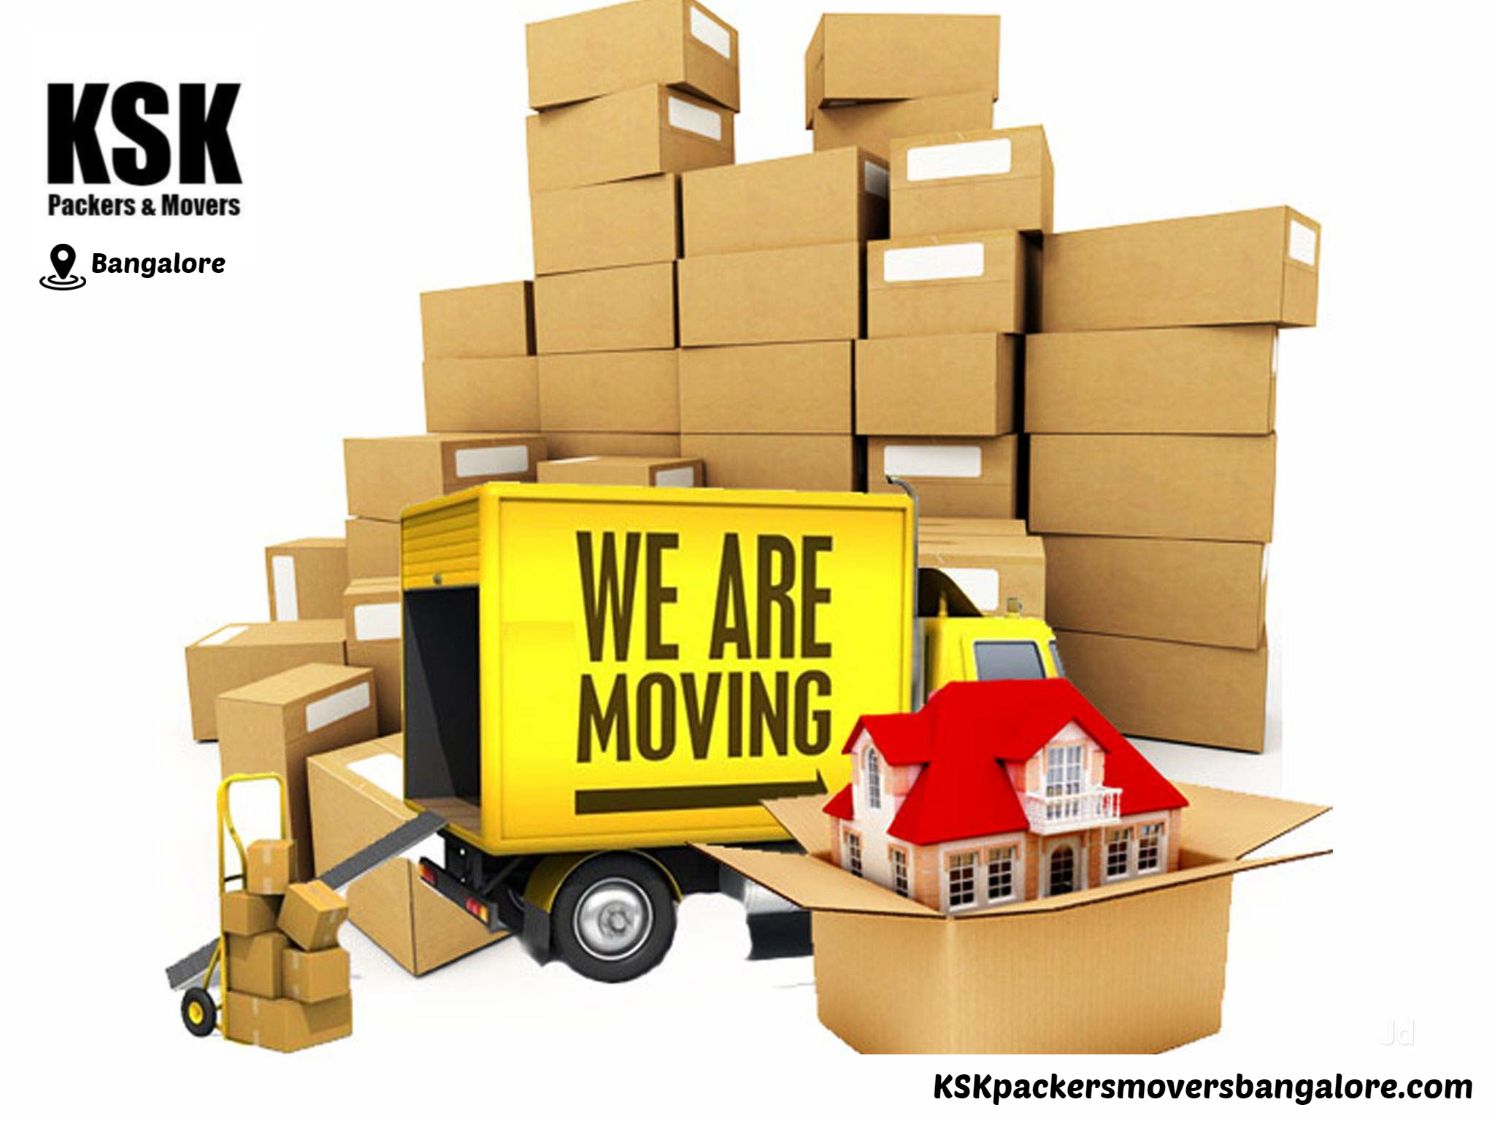 Ksk packers movers